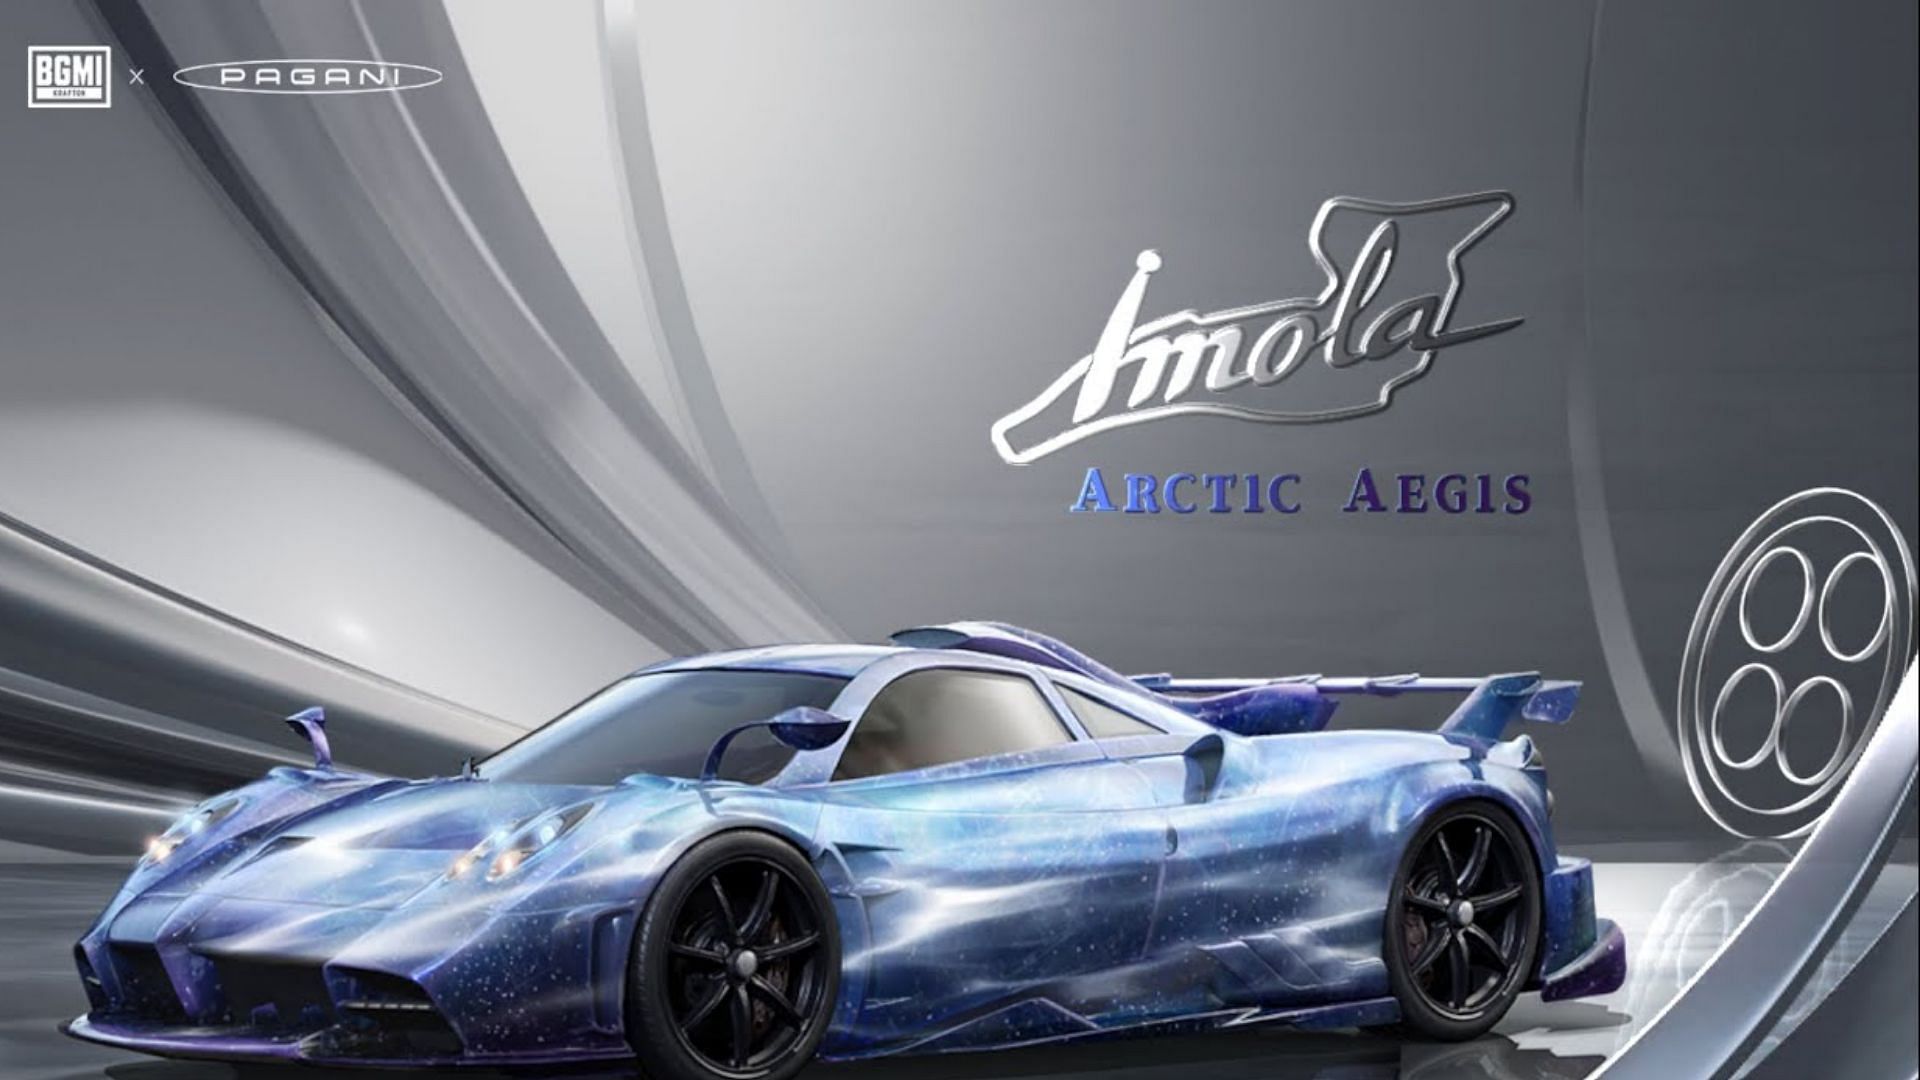 Pagani collaboration Speed Drift event is now live in BGMI (Image via Sportskeeda) 